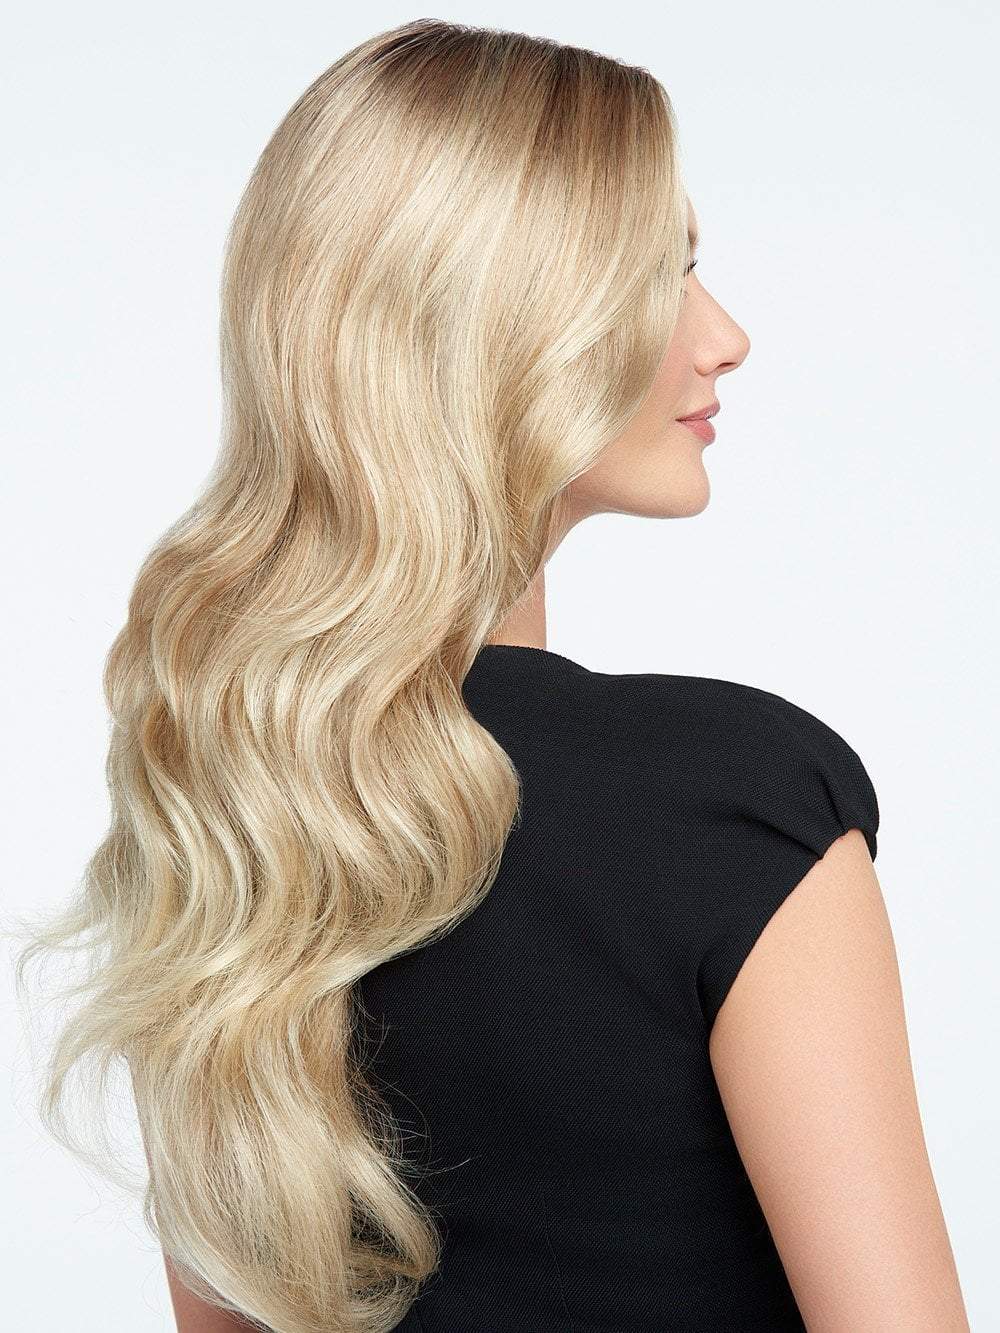 This long wig is the epitome of classic length and wave!